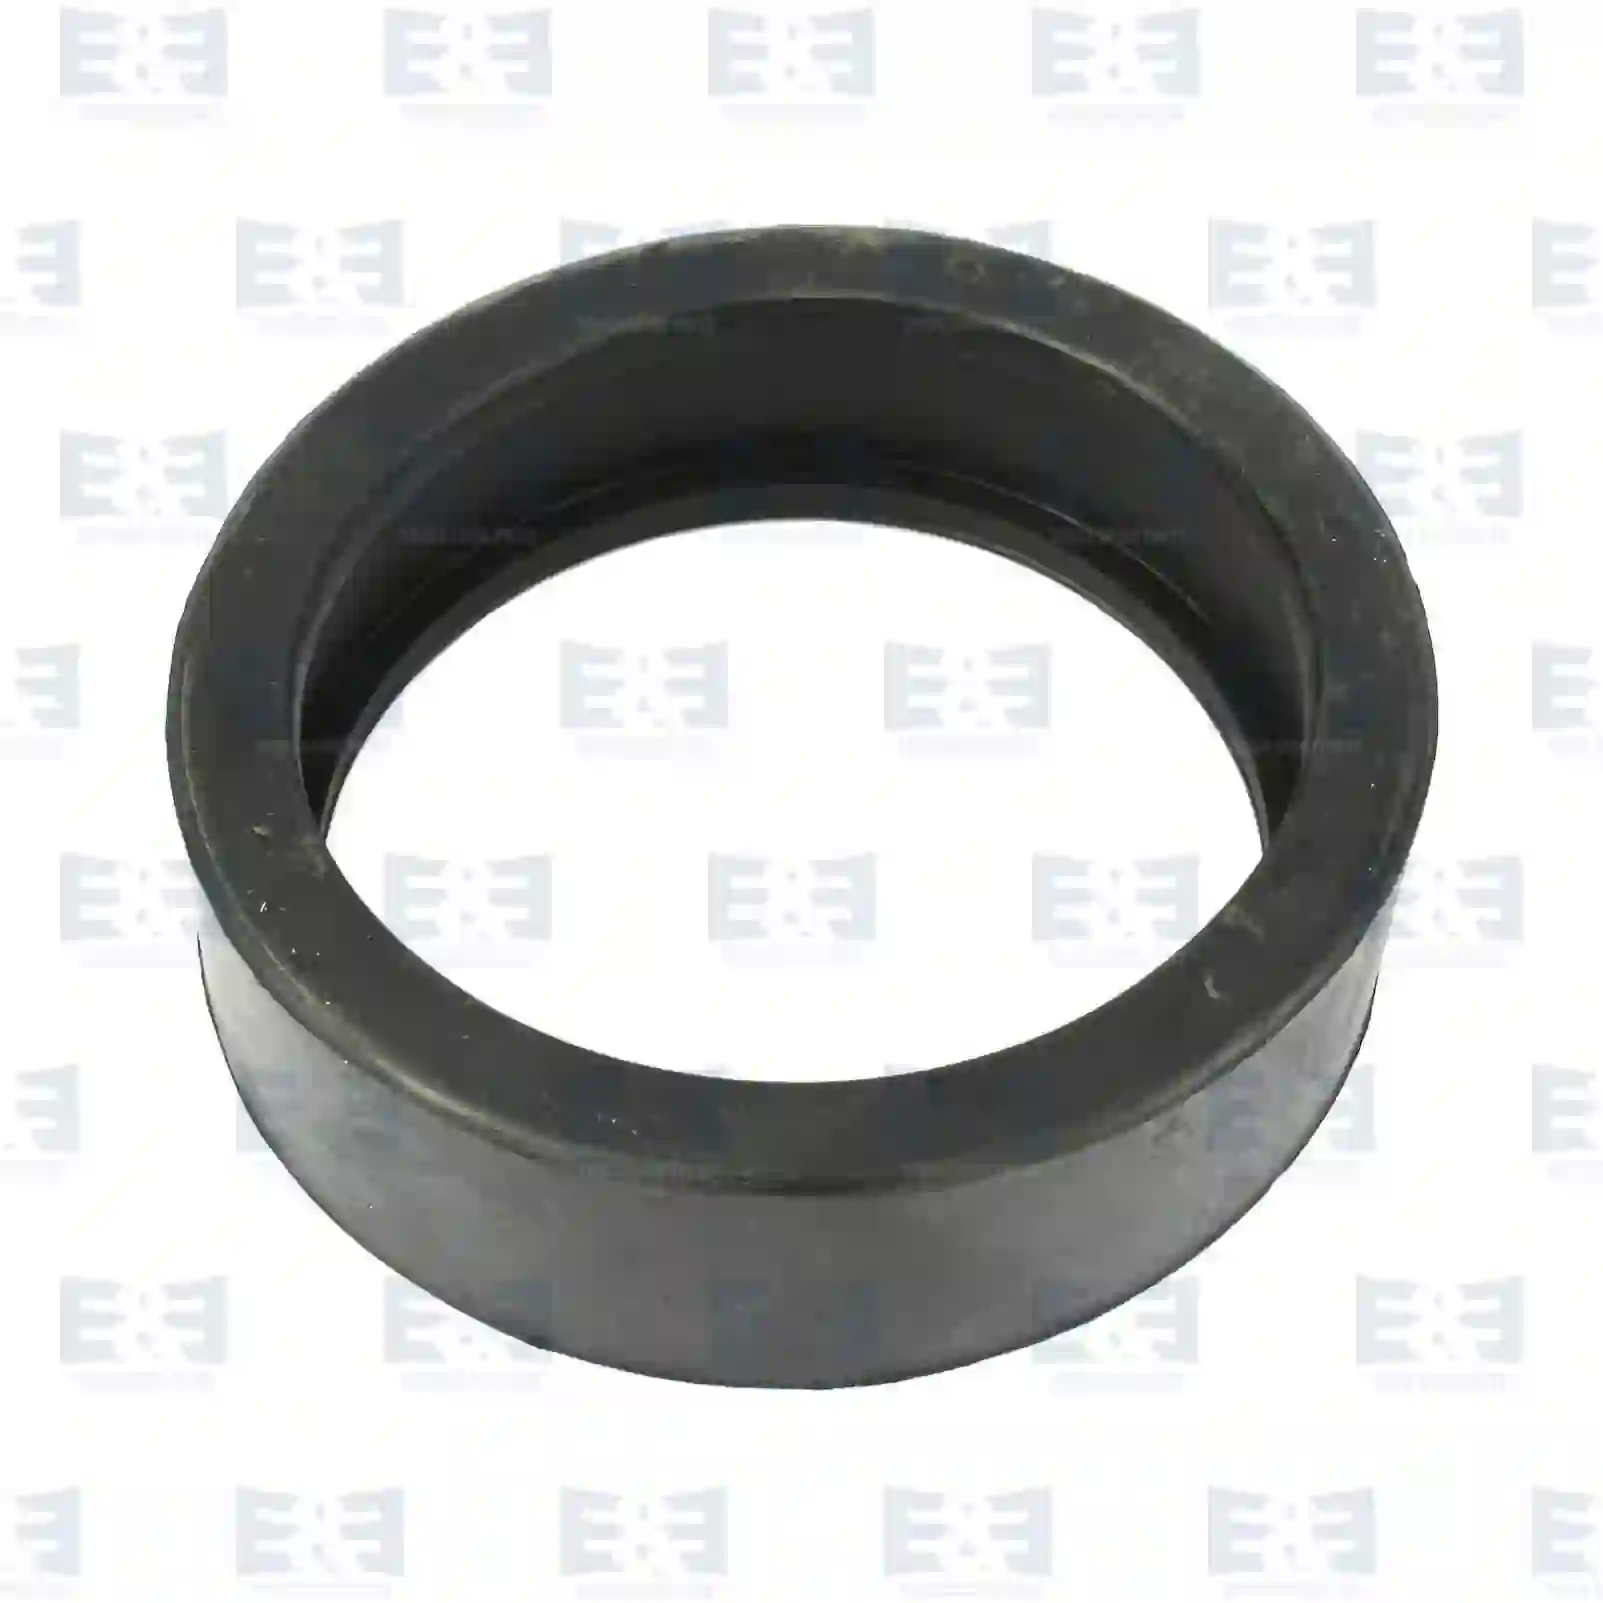 Support Bearing Rubber mounting, EE No 2E2276859 ,  oem no:3634130012, , E&E Truck Spare Parts | Truck Spare Parts, Auotomotive Spare Parts